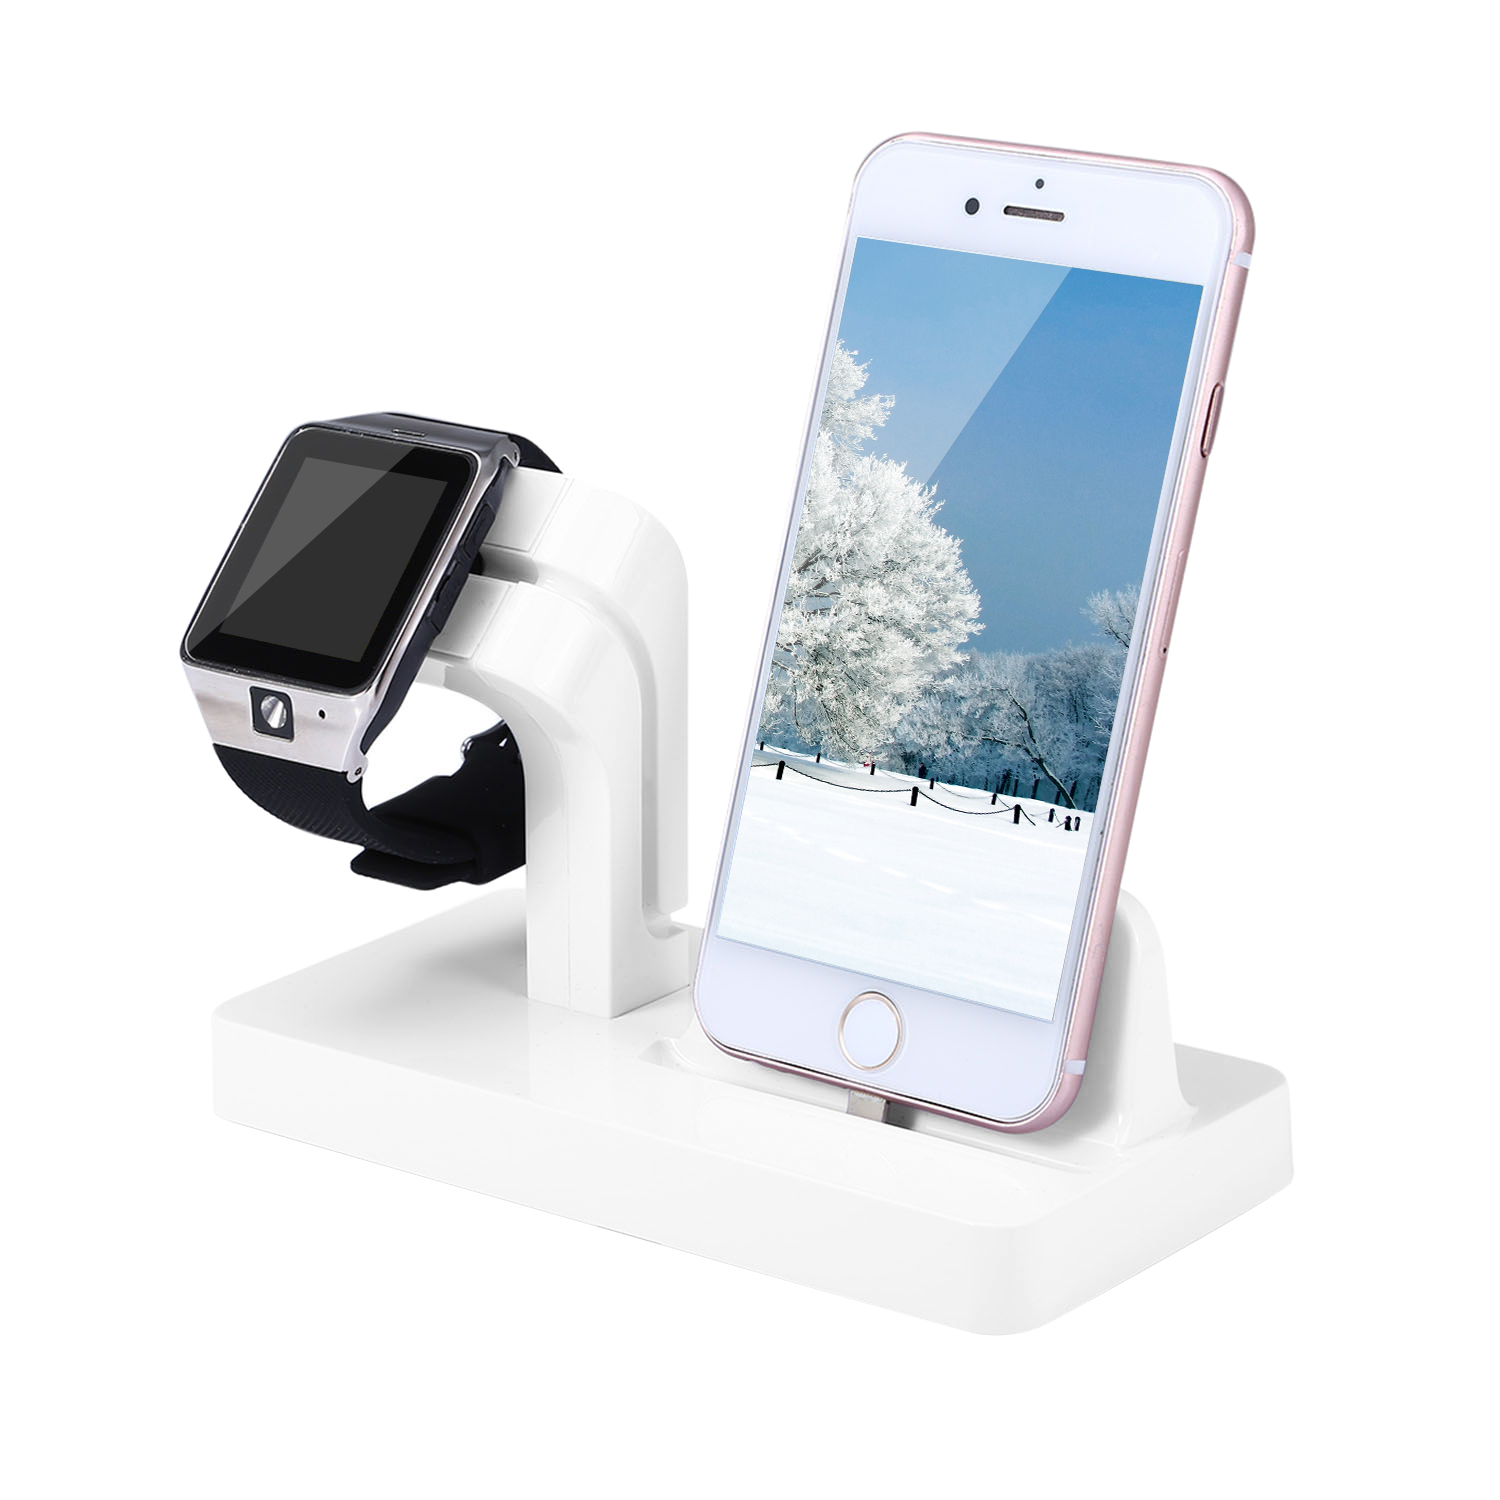 iMountek Charging Stand Dock Station Charger Holder for Apple Watch Series iPhone 11/X/8/8Plus/7 White - image 1 of 6